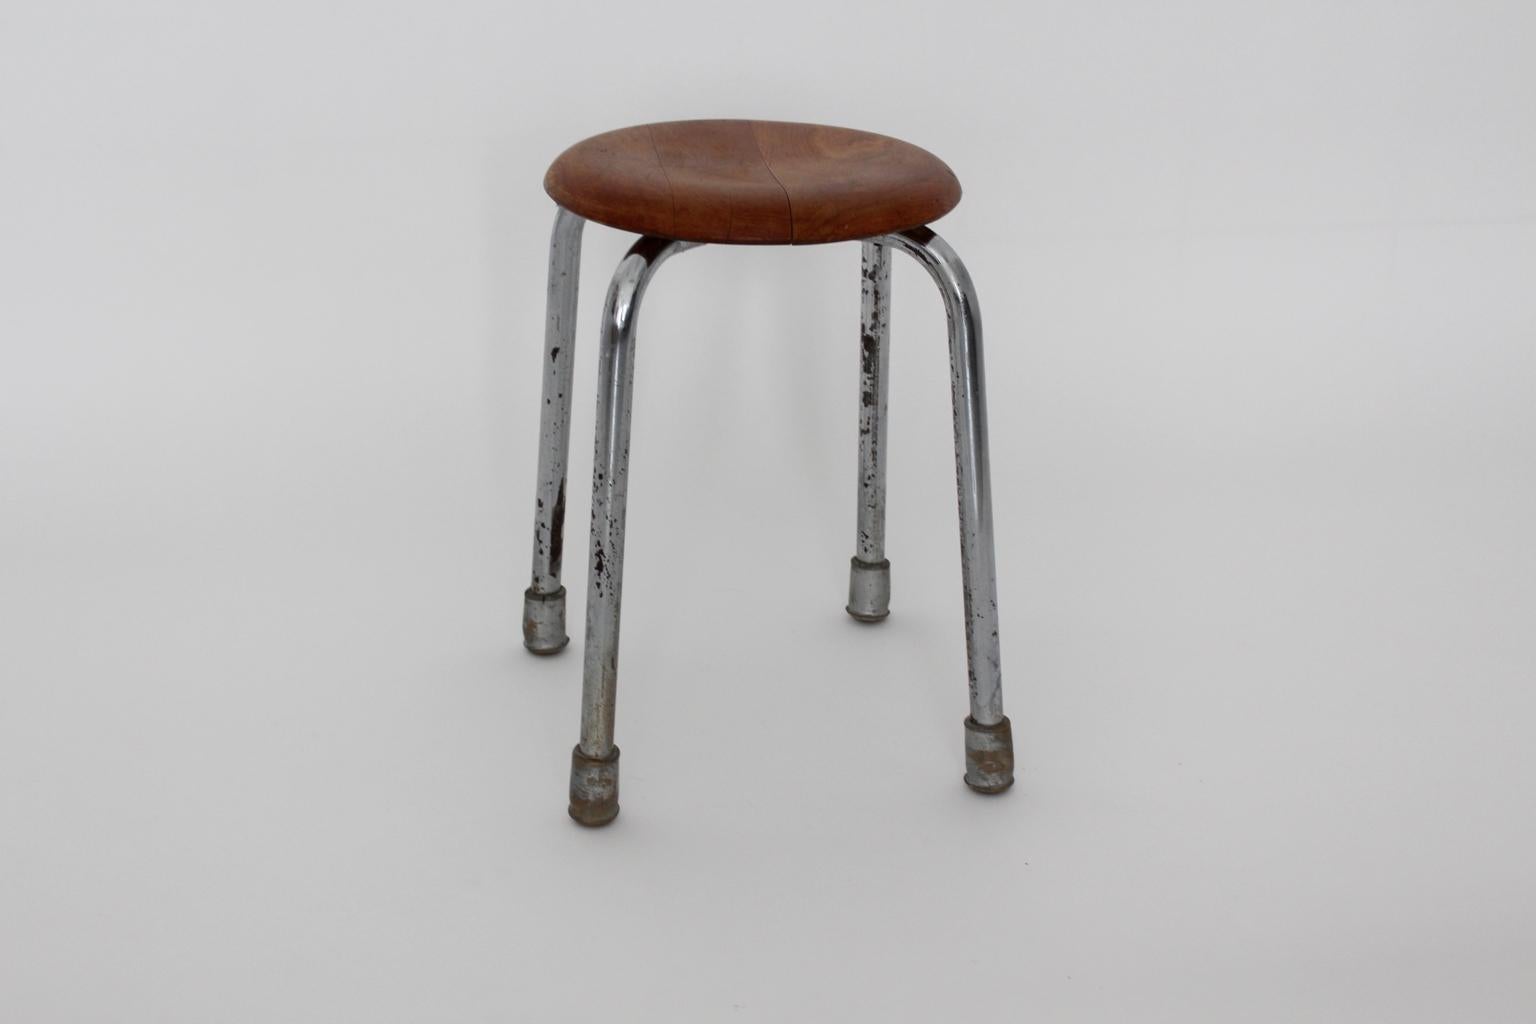 The chromed metal stool shows 4 feet with rubber sabots and also a round shaped beechwood seat.
Good vintage condition with some signs of age.
approx. measures:
diameter: 49 cm
height: 47.5 cm.